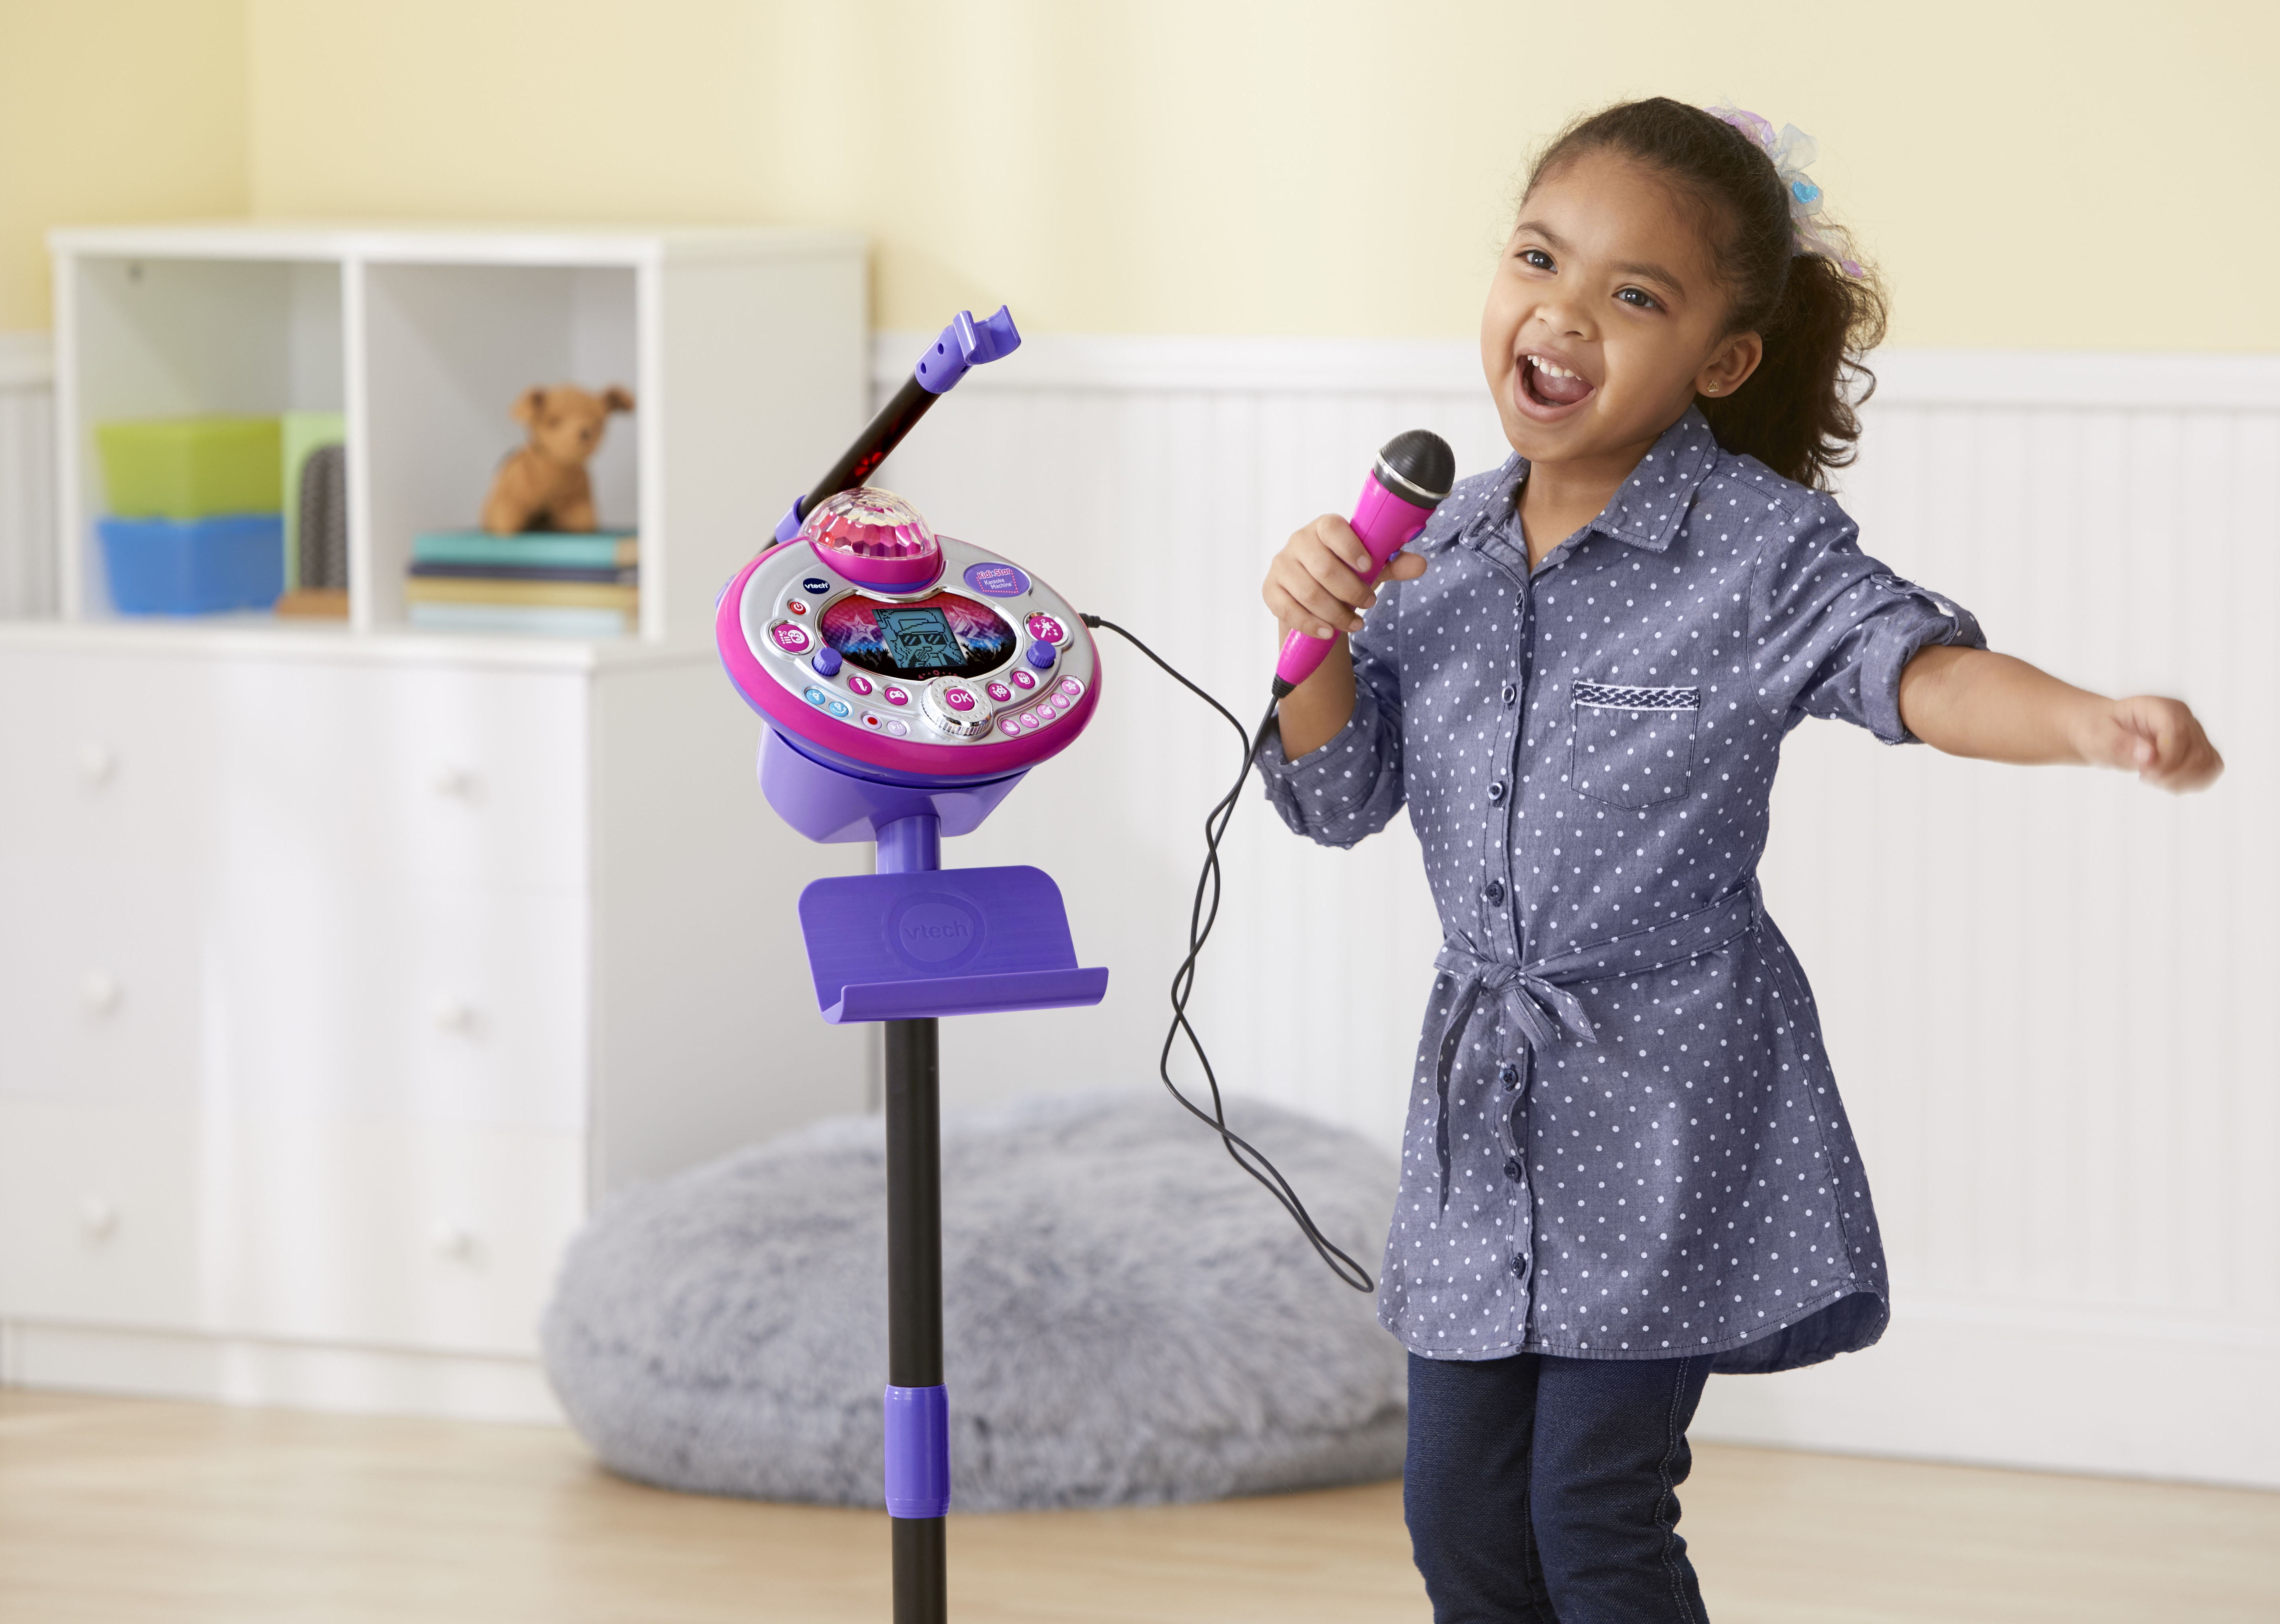 vtech kidi super star karaoke system with microphone and mic stand